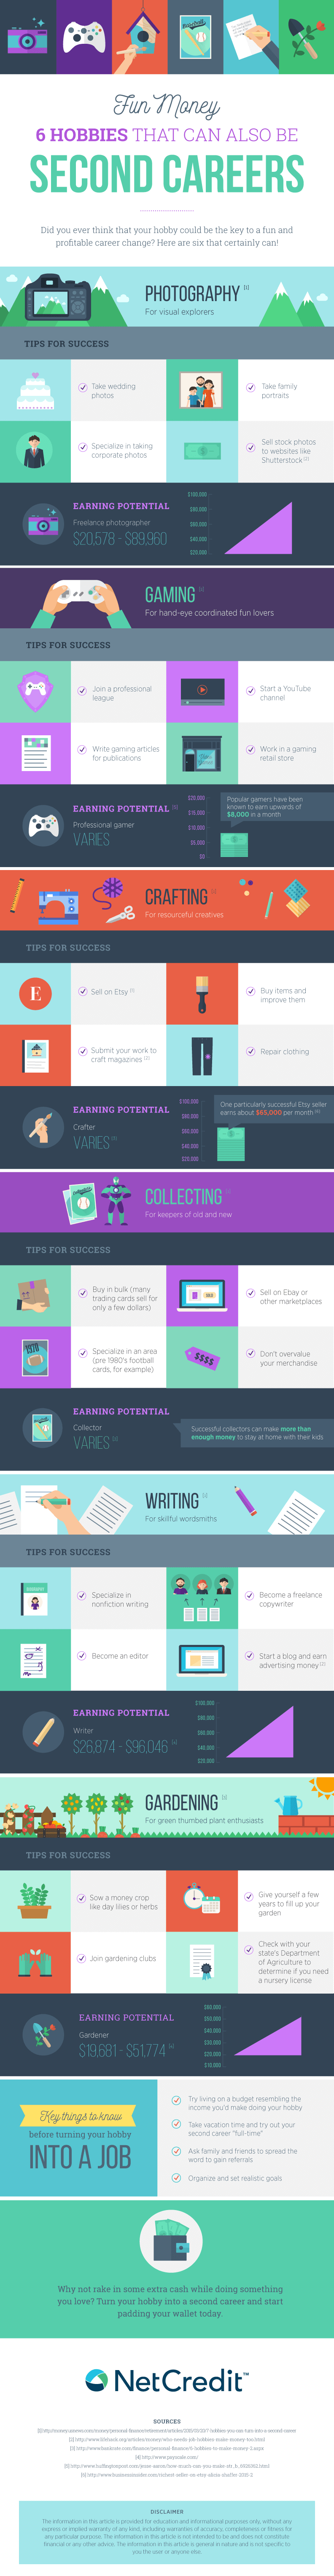 6 Hobbies That Can Also Be Second Careers - #infographic